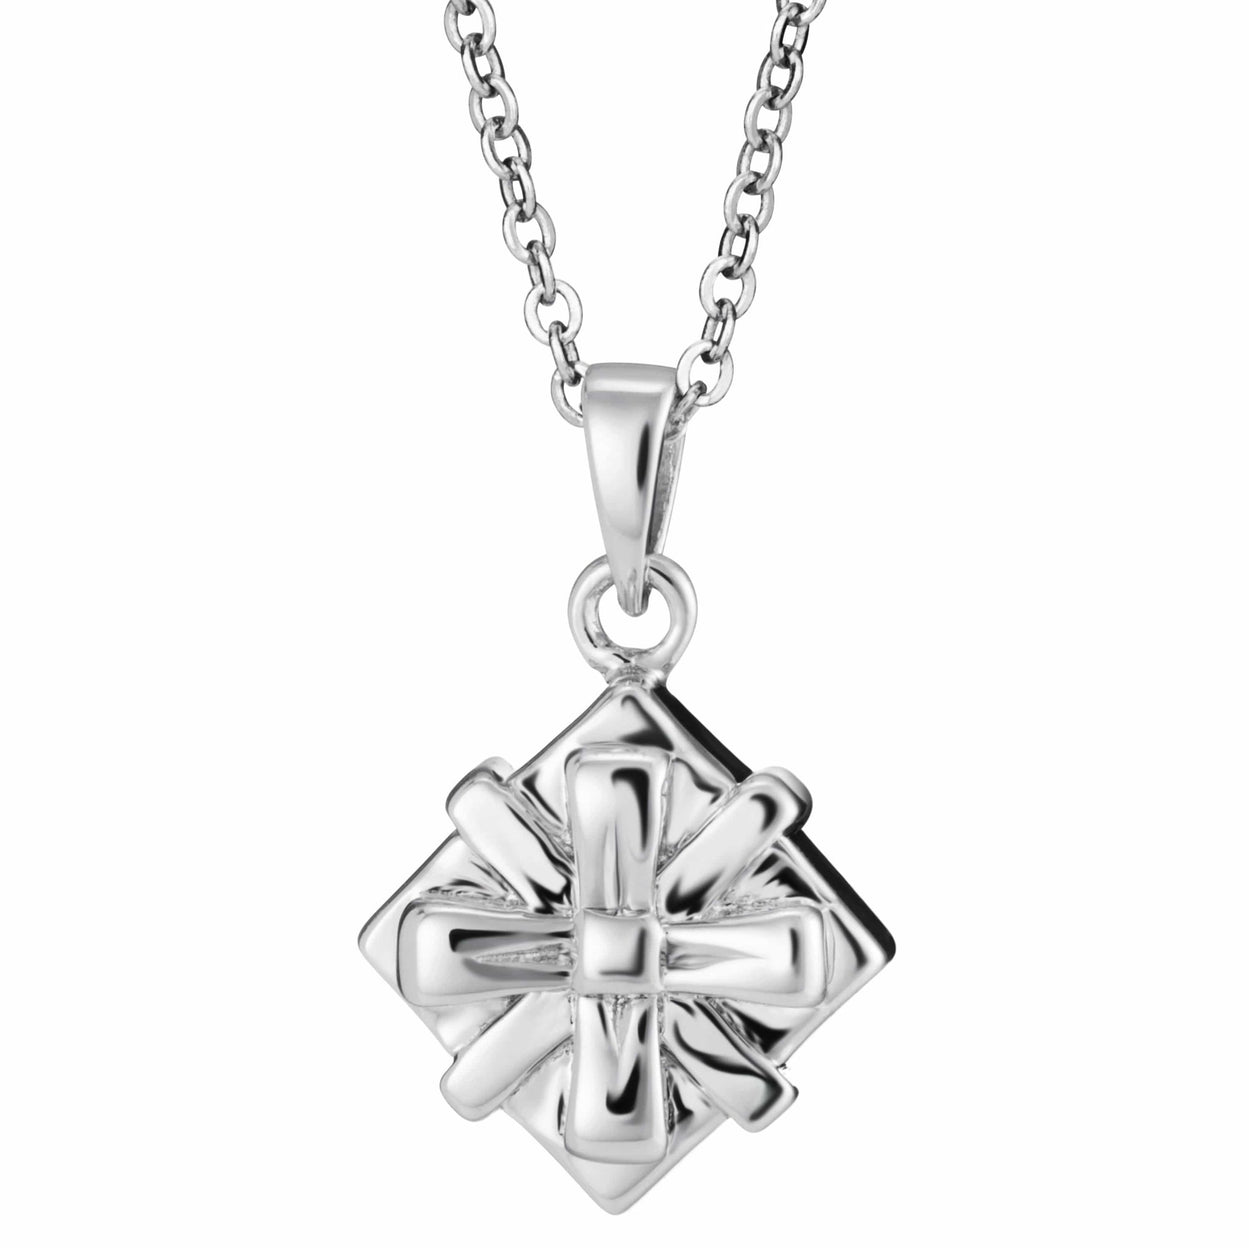 Load image into Gallery viewer, EverWith™ Self-fill Gift Box Memorial Ashes Pendant - EverWith Memorial Jewellery - Trade